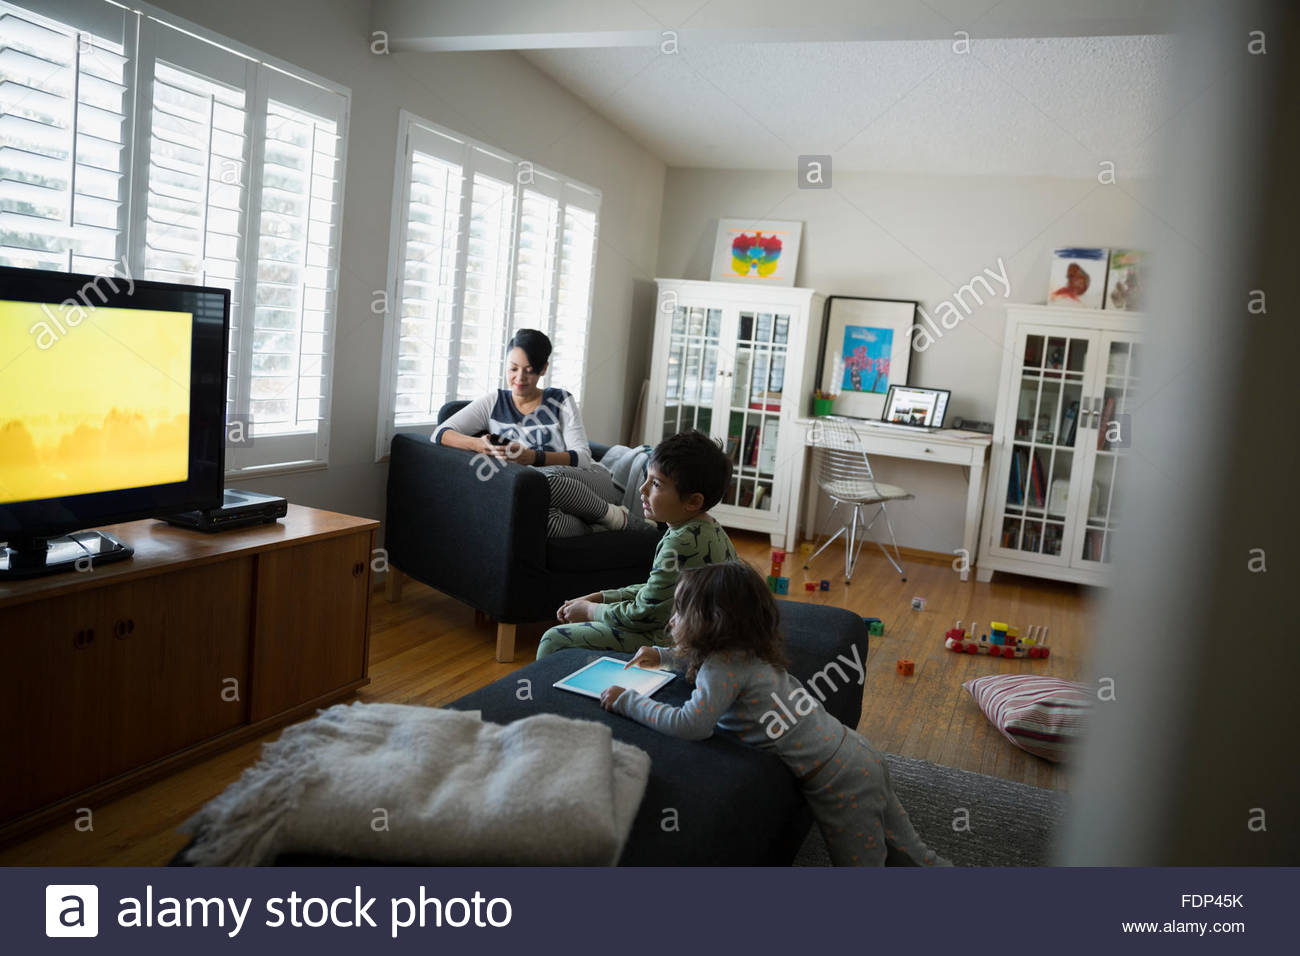 Family relaxing watching TV in living room Stock Photo